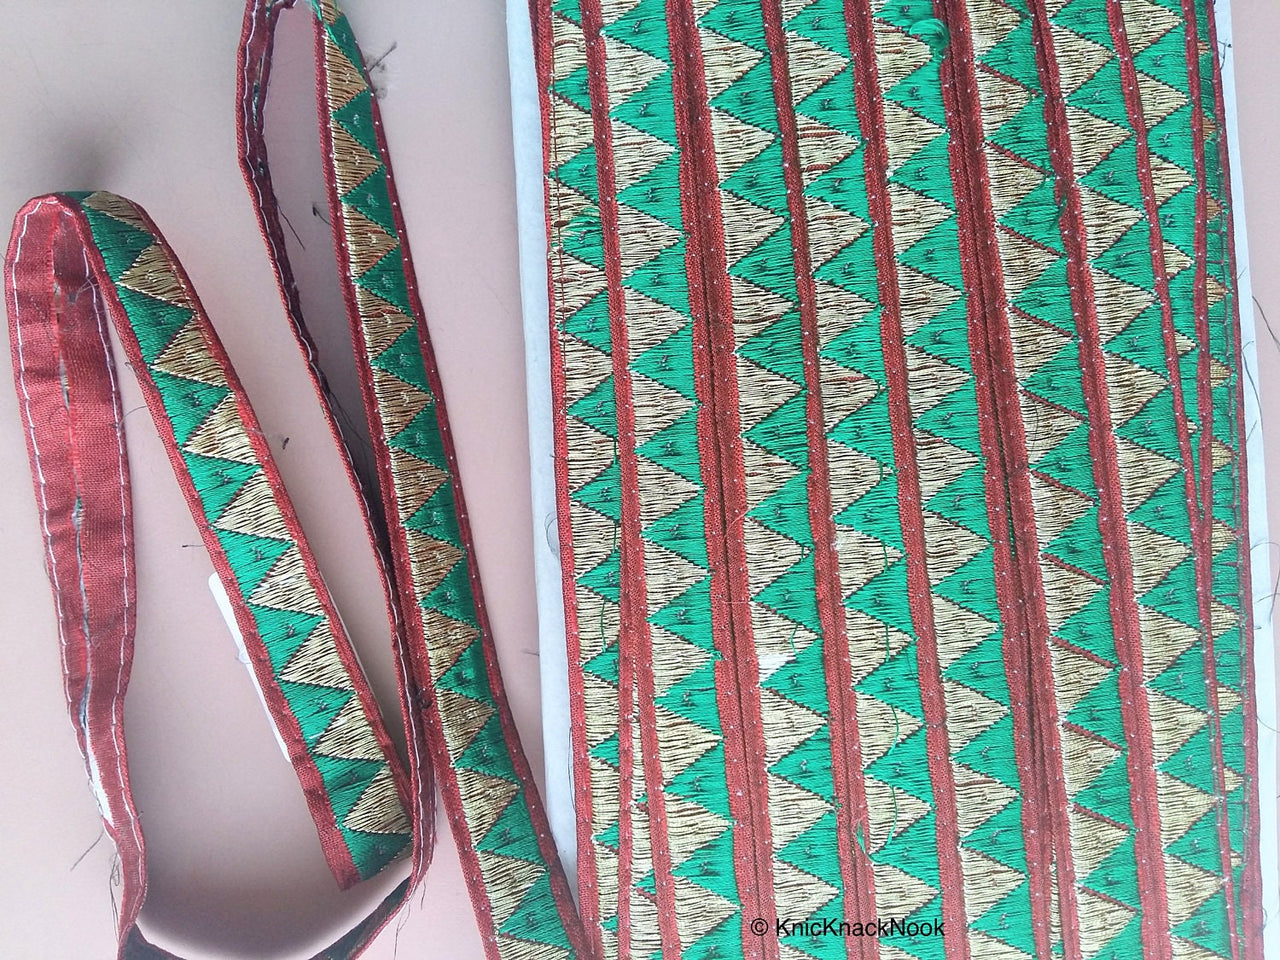 Red, Green And Bronze Thread Triangle Embroidery One Yard Lace Trim 18mm Wide - 200317L303